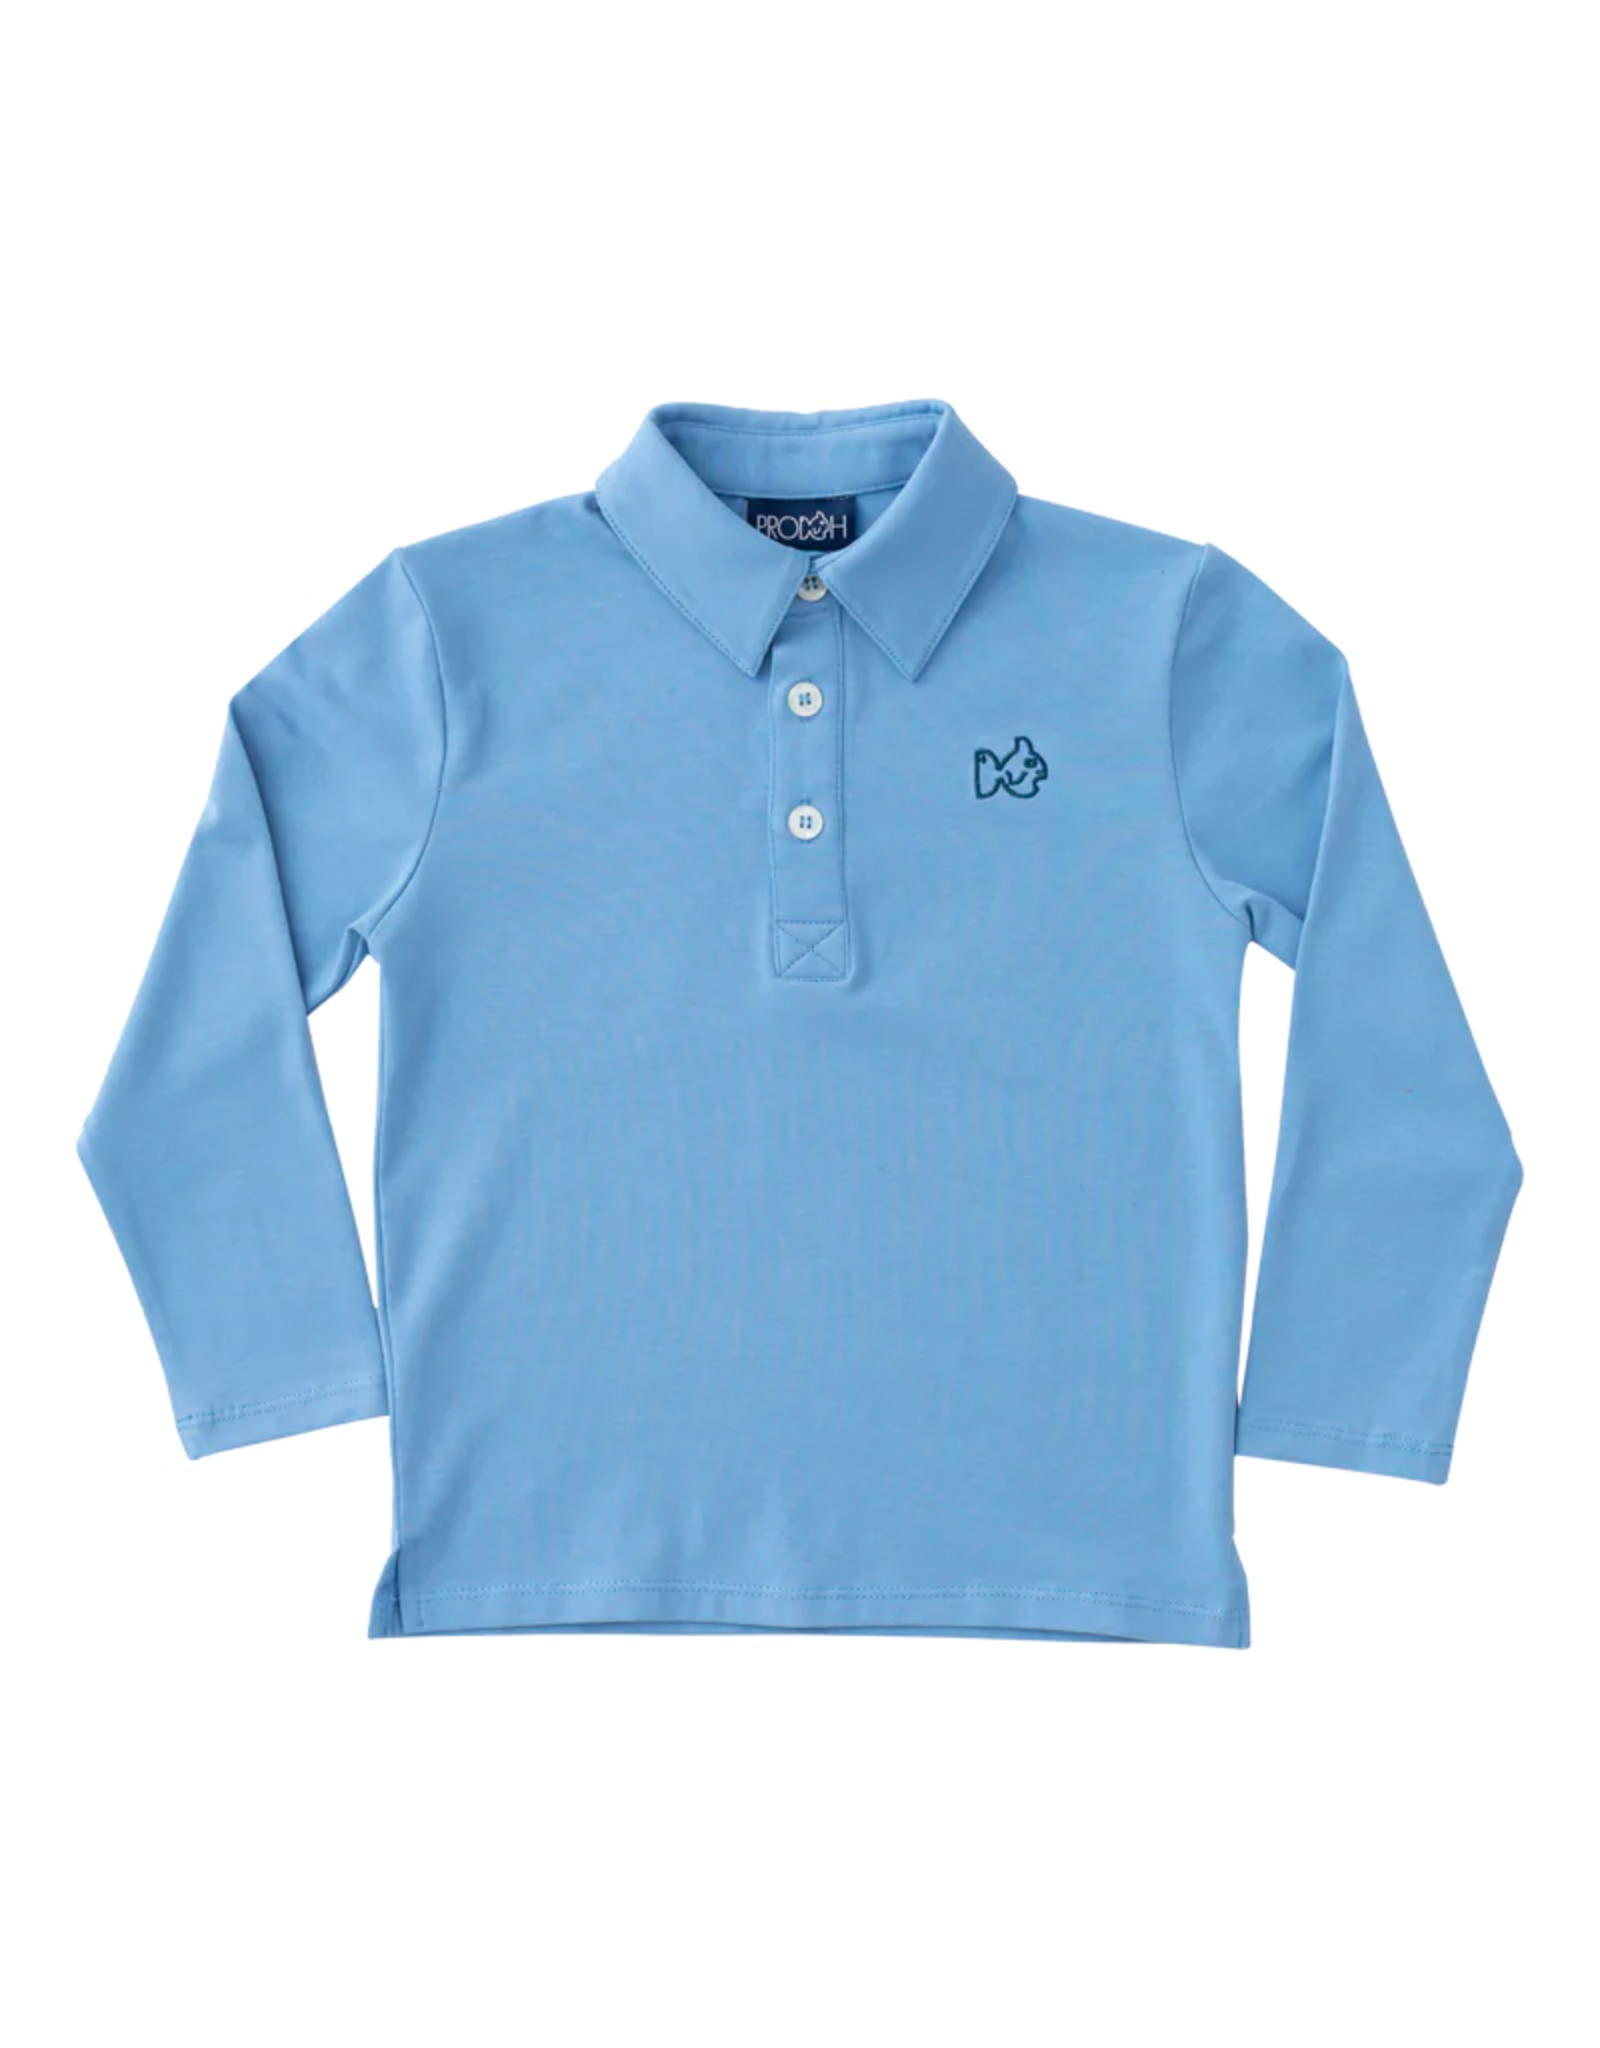 Prodoh LS Too Cool for School Polo, Dutch Canal